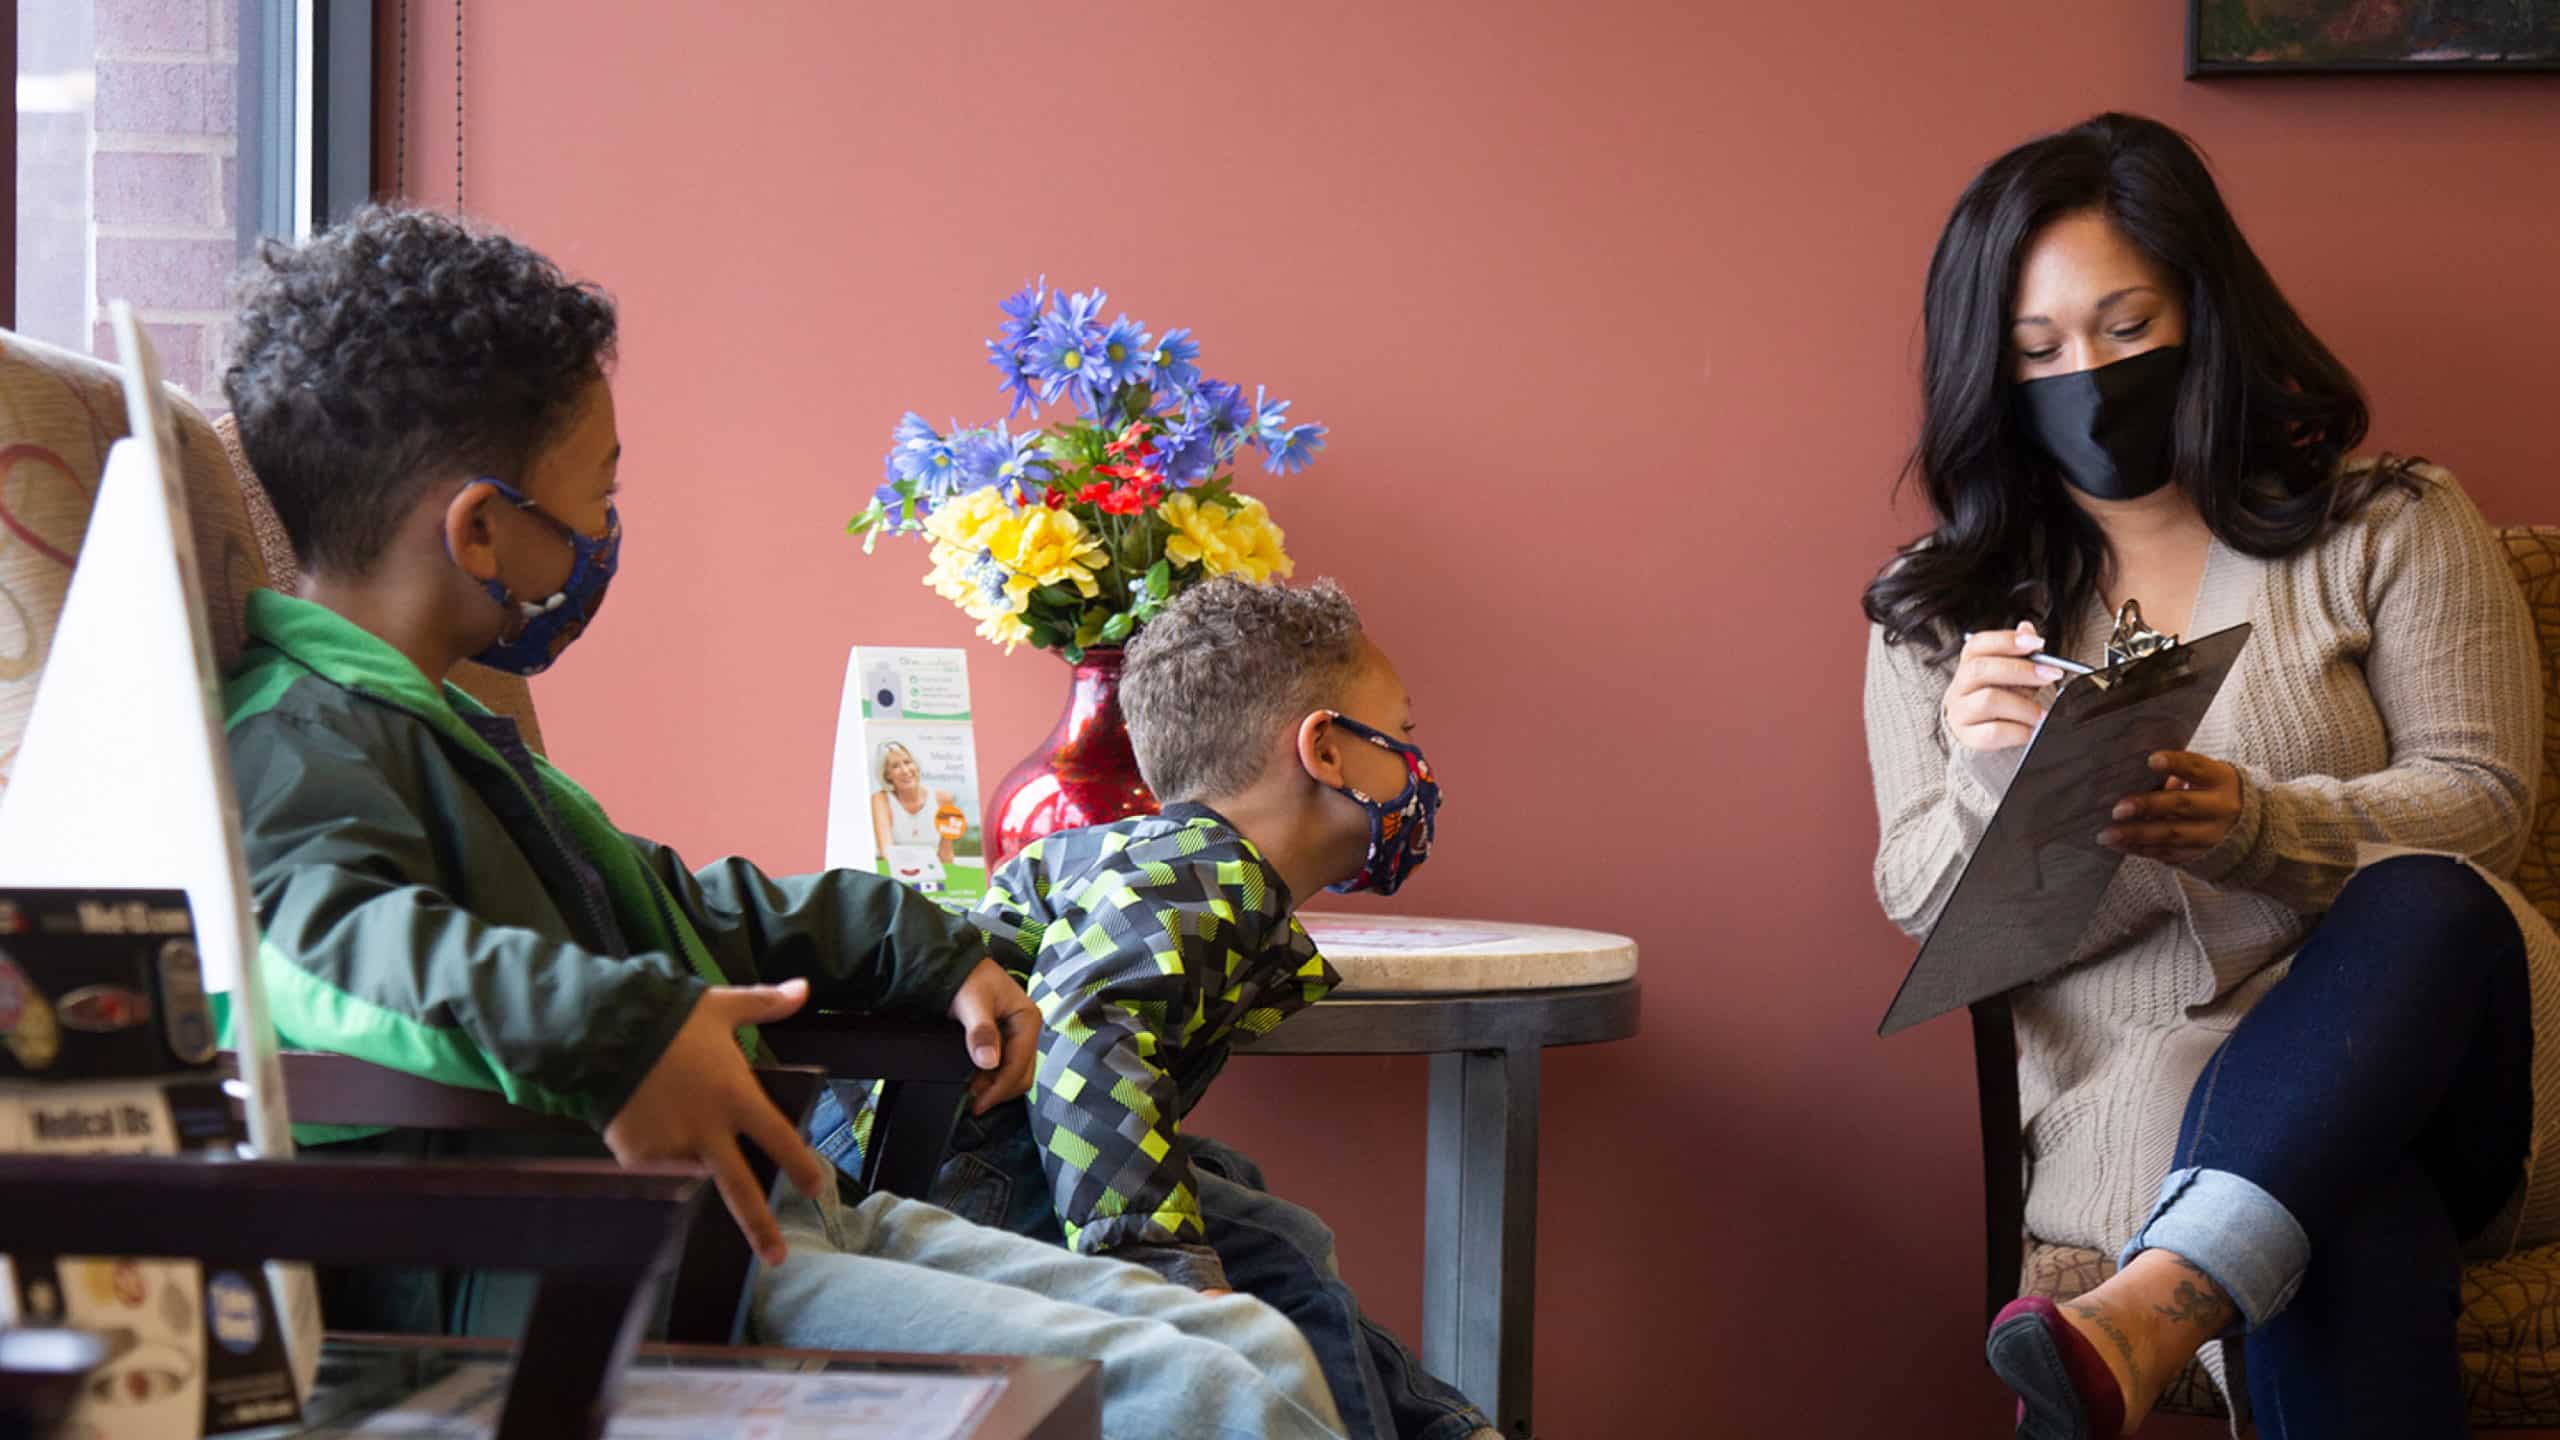 A mother schedules her next clinic visit for her children in the waiting room at Richfield Medical Group in Minnesota.